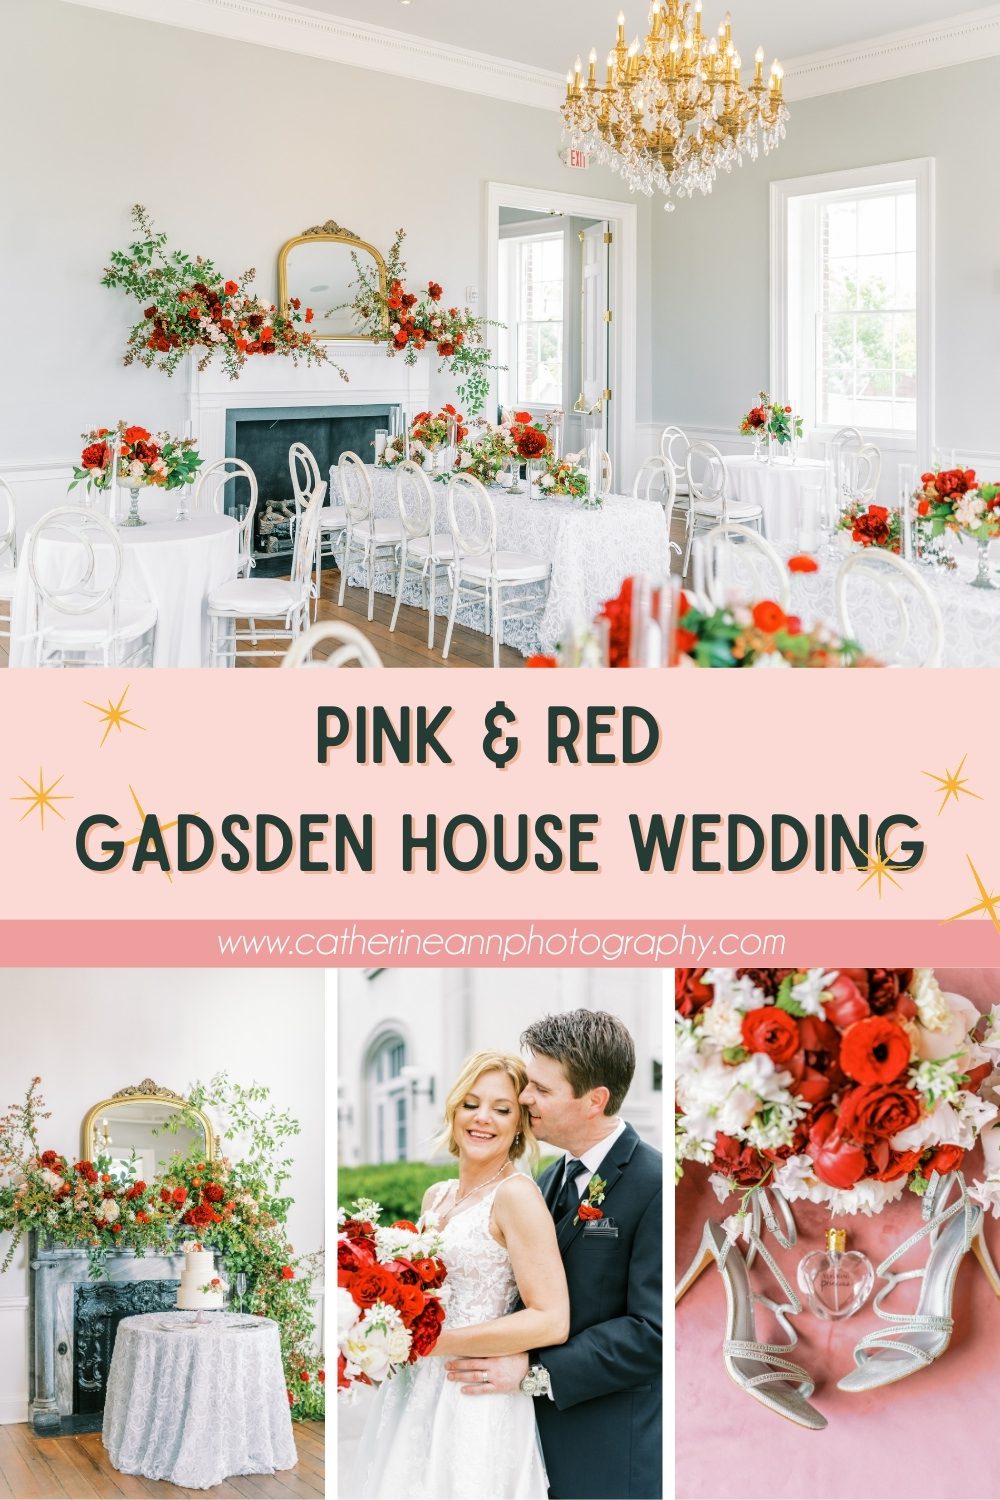 Gadsden House Wedding with Pink & Red details